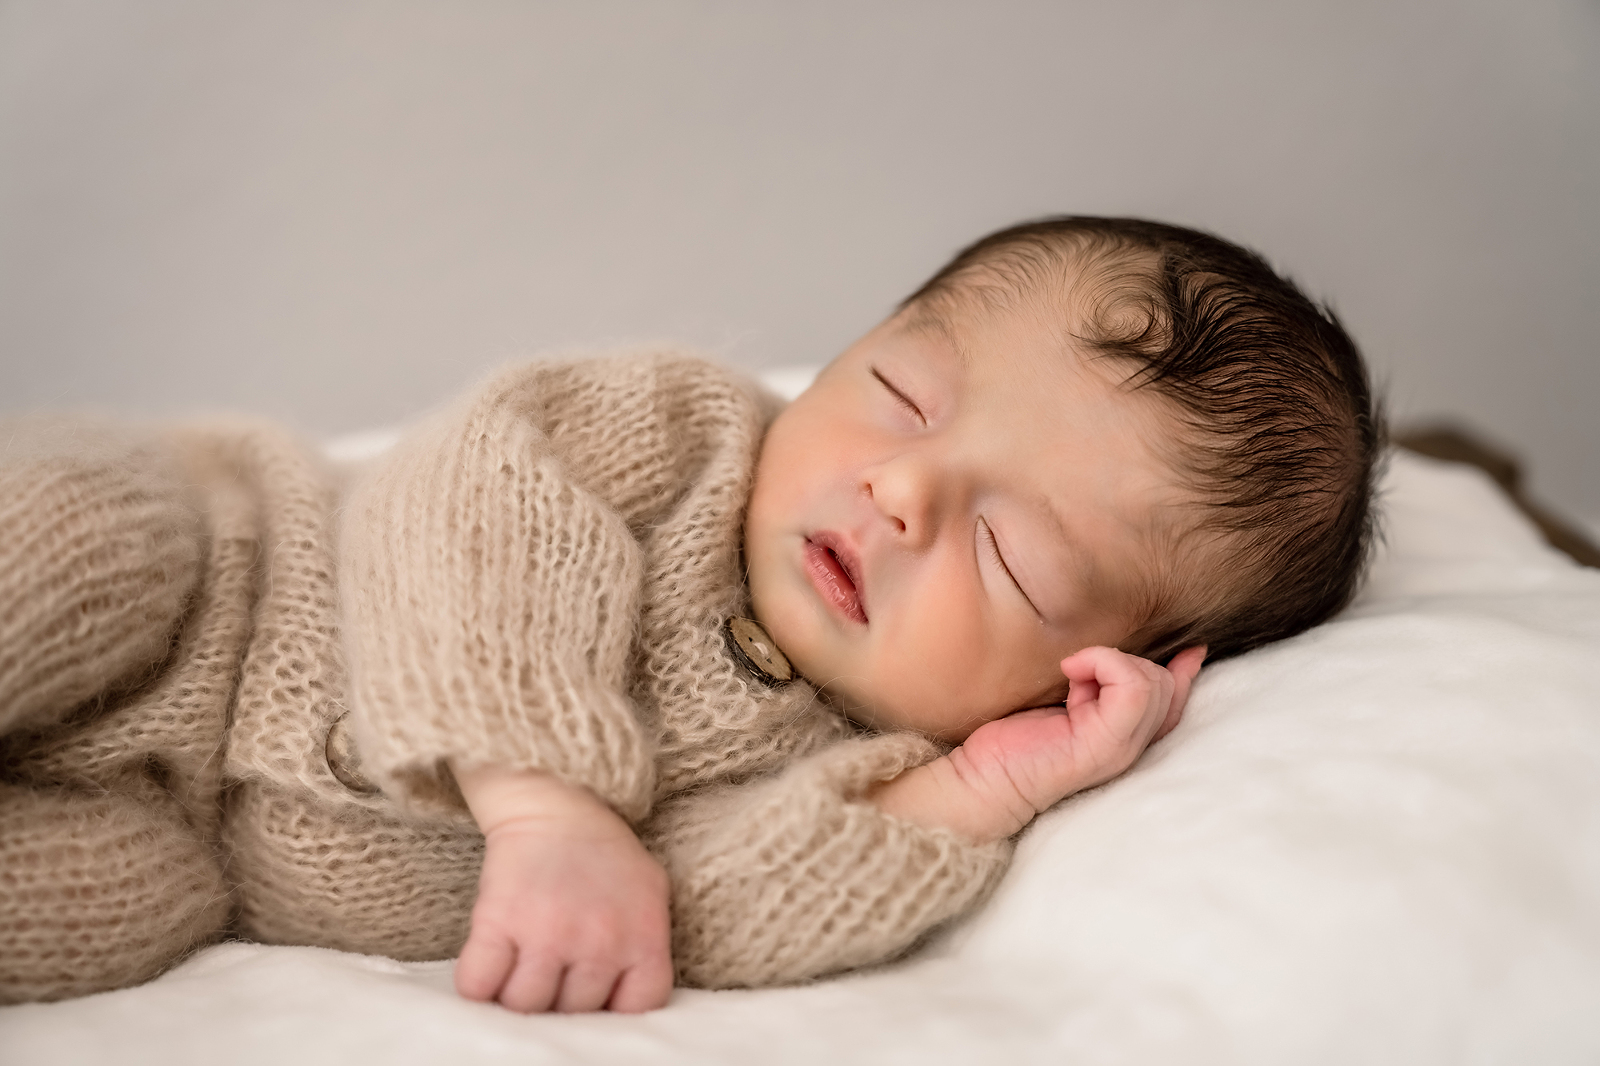 Styled In Home Newborn Photoshoot with Natural Light baby photographer in Austin Texas